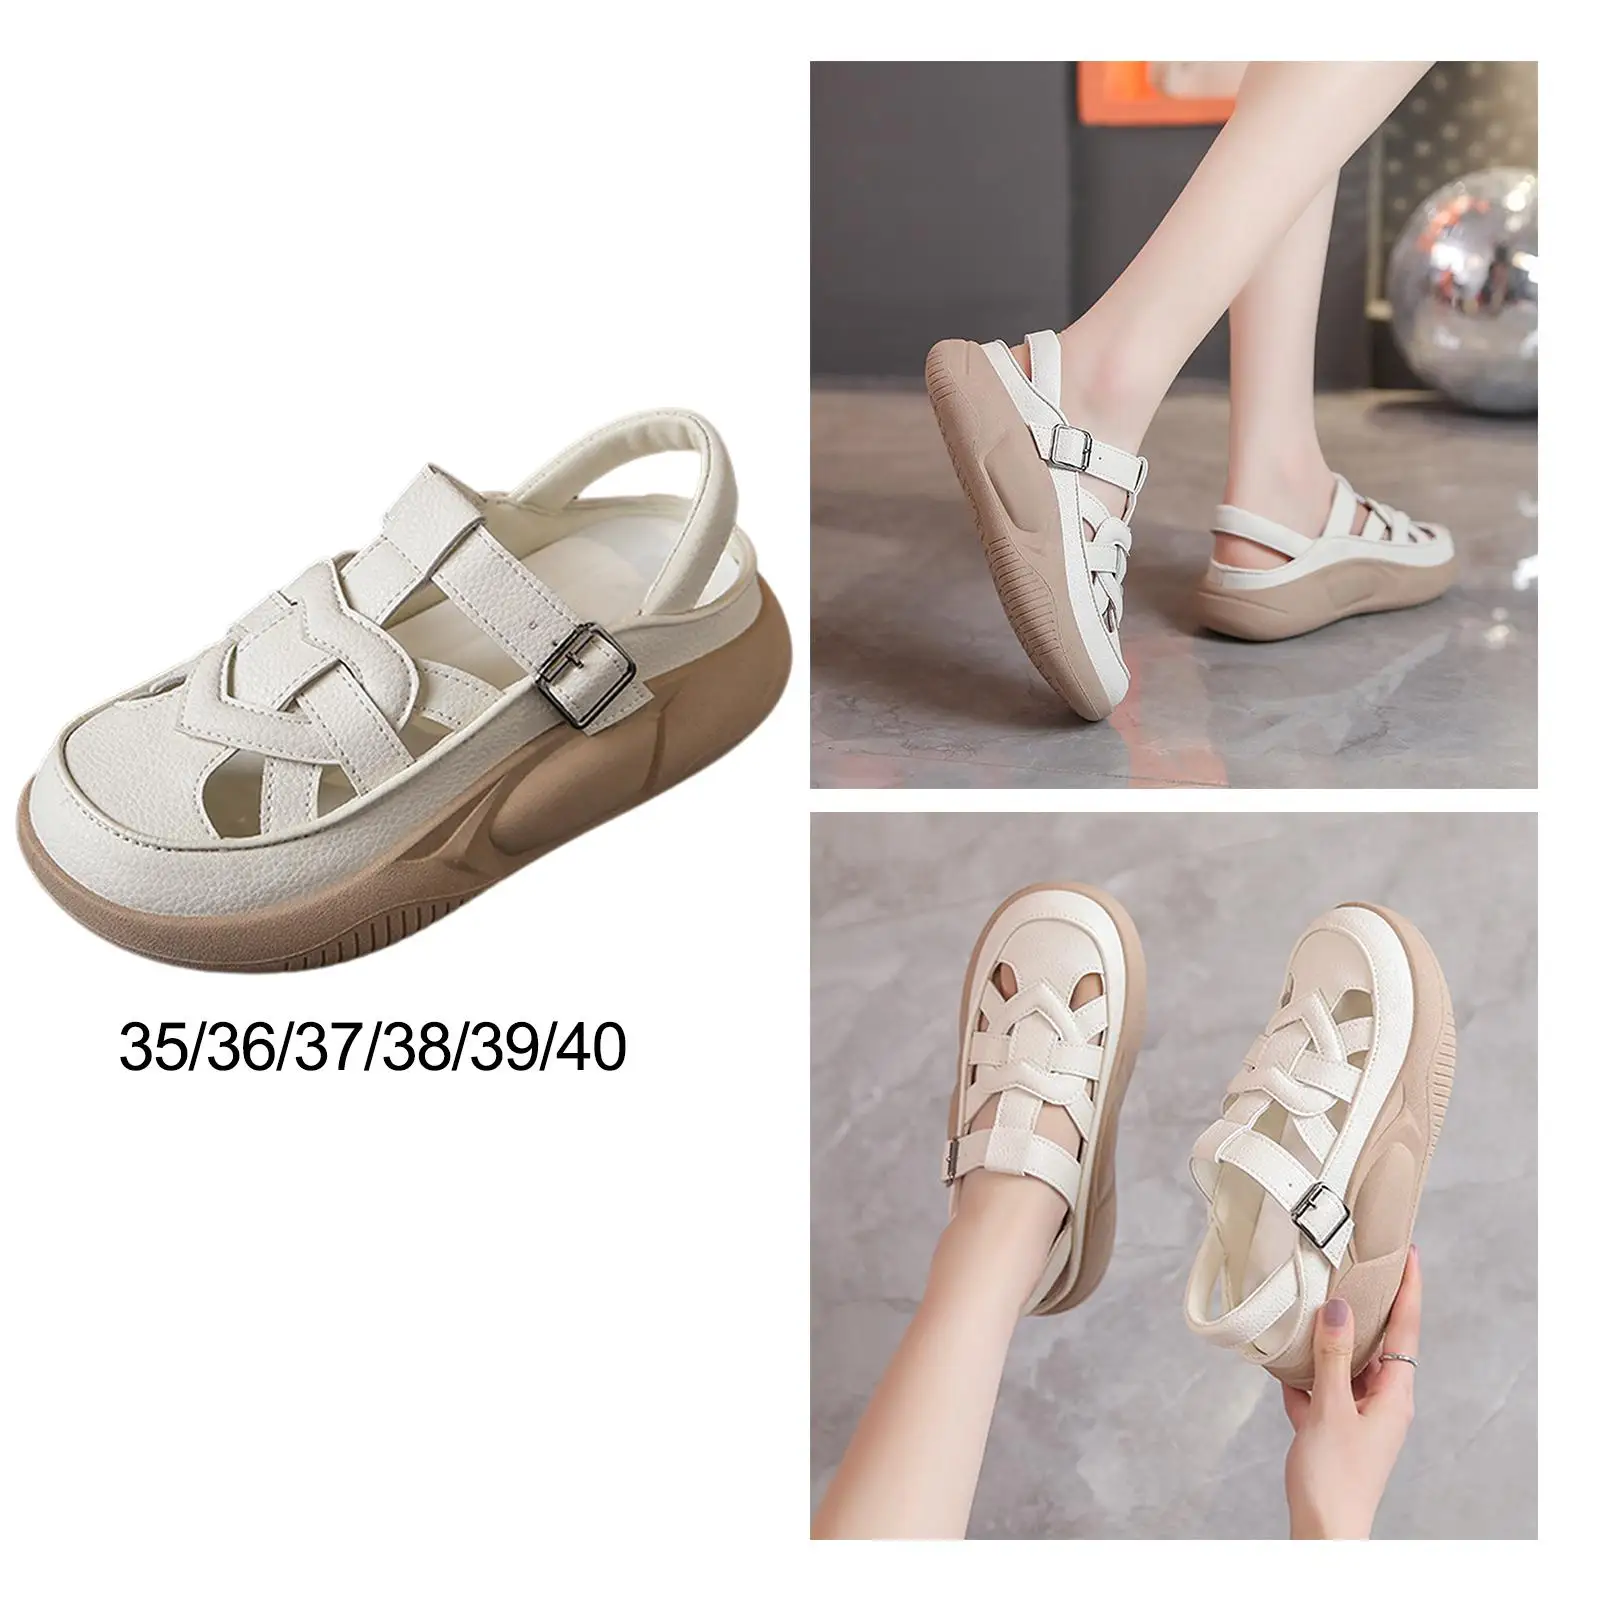 Women`s Summer Sandals Trendy Soft Closed Toe Casual Platform Sandals Slip on Sandals for Dating Beach Travel Activities